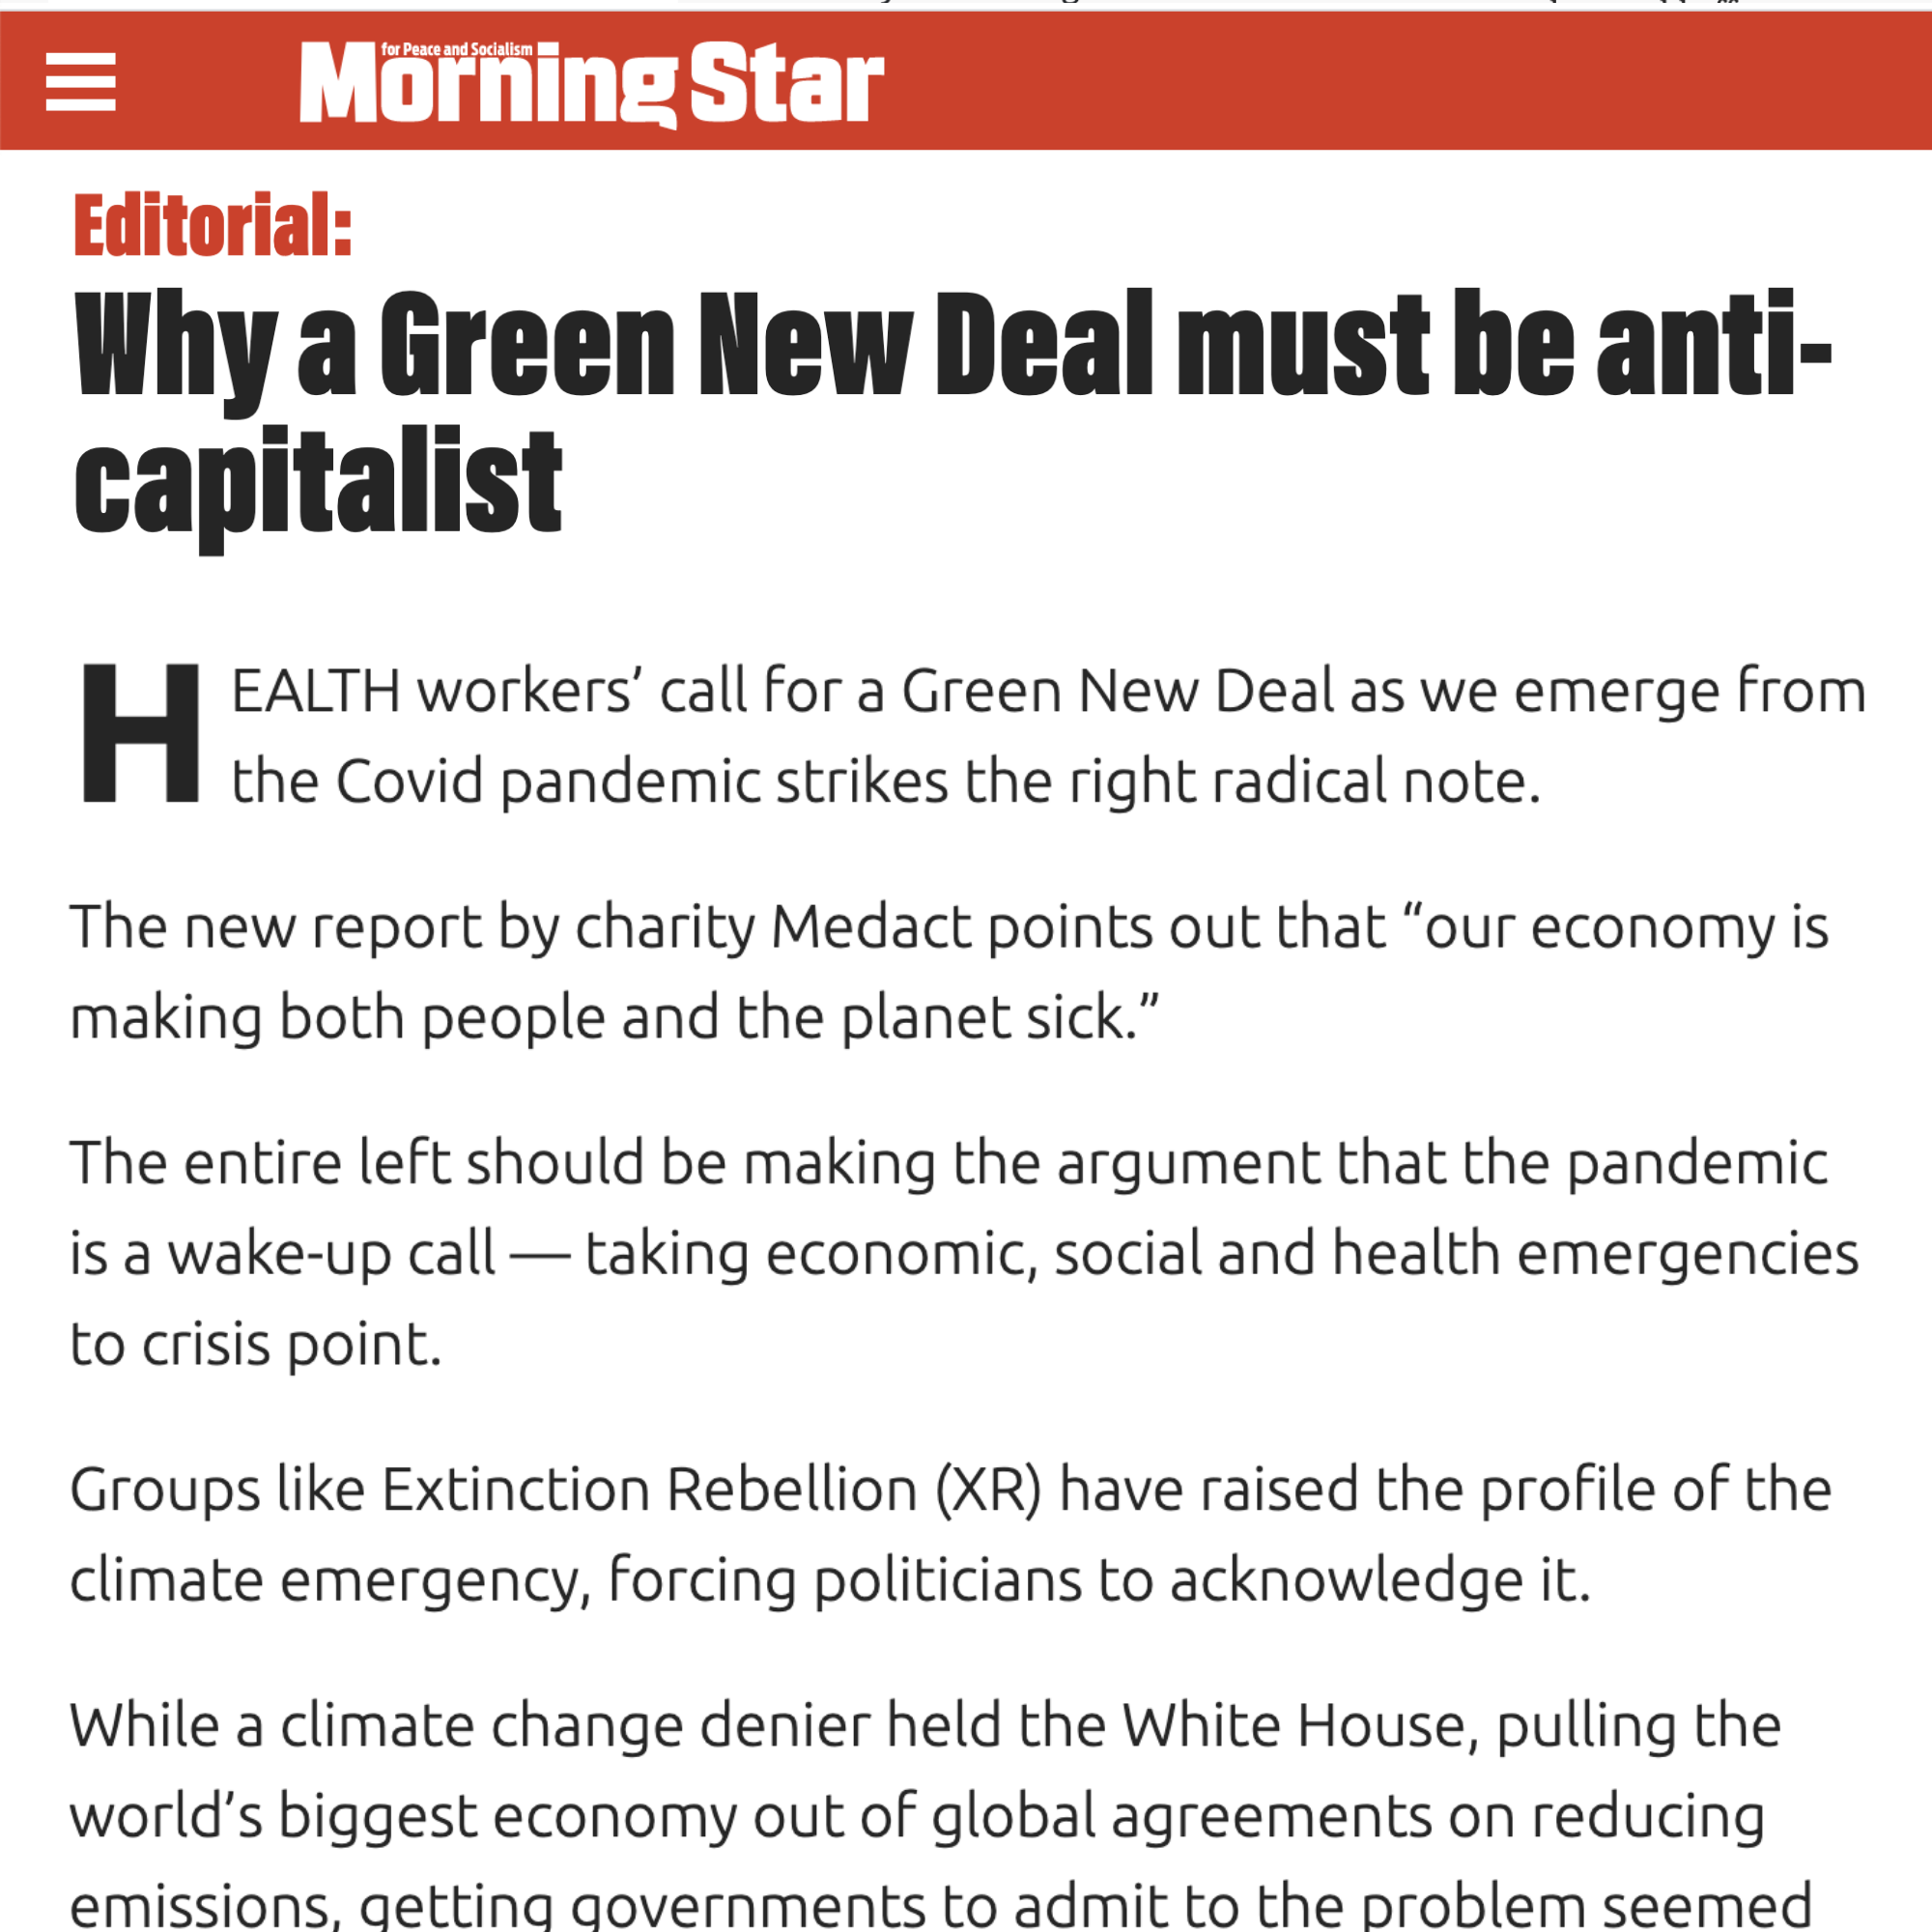 Why a Green New Deal must be anti-capitalist